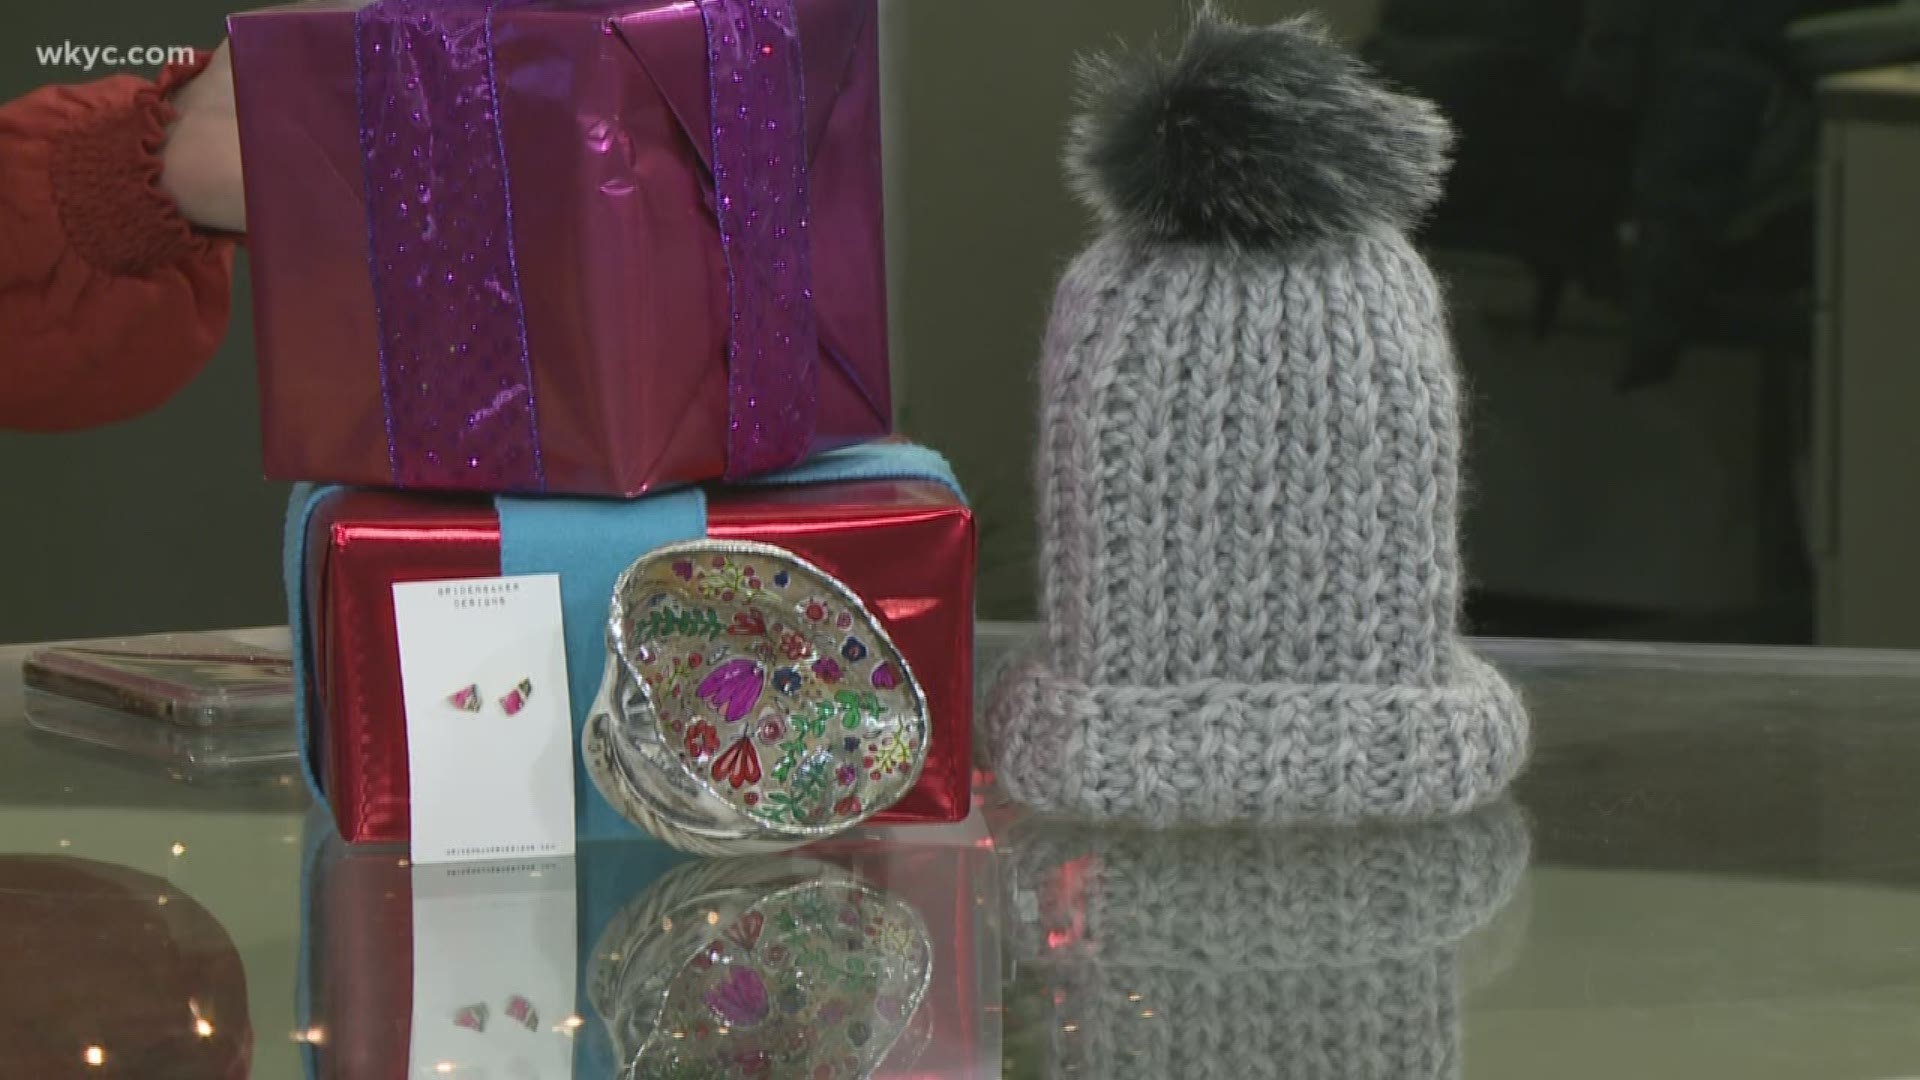 Dec. 12, 2019: Here's your chance to win! It's a two-prize Thursday as you can win a knit hat along with a floral shell jewelry dish and earring set.